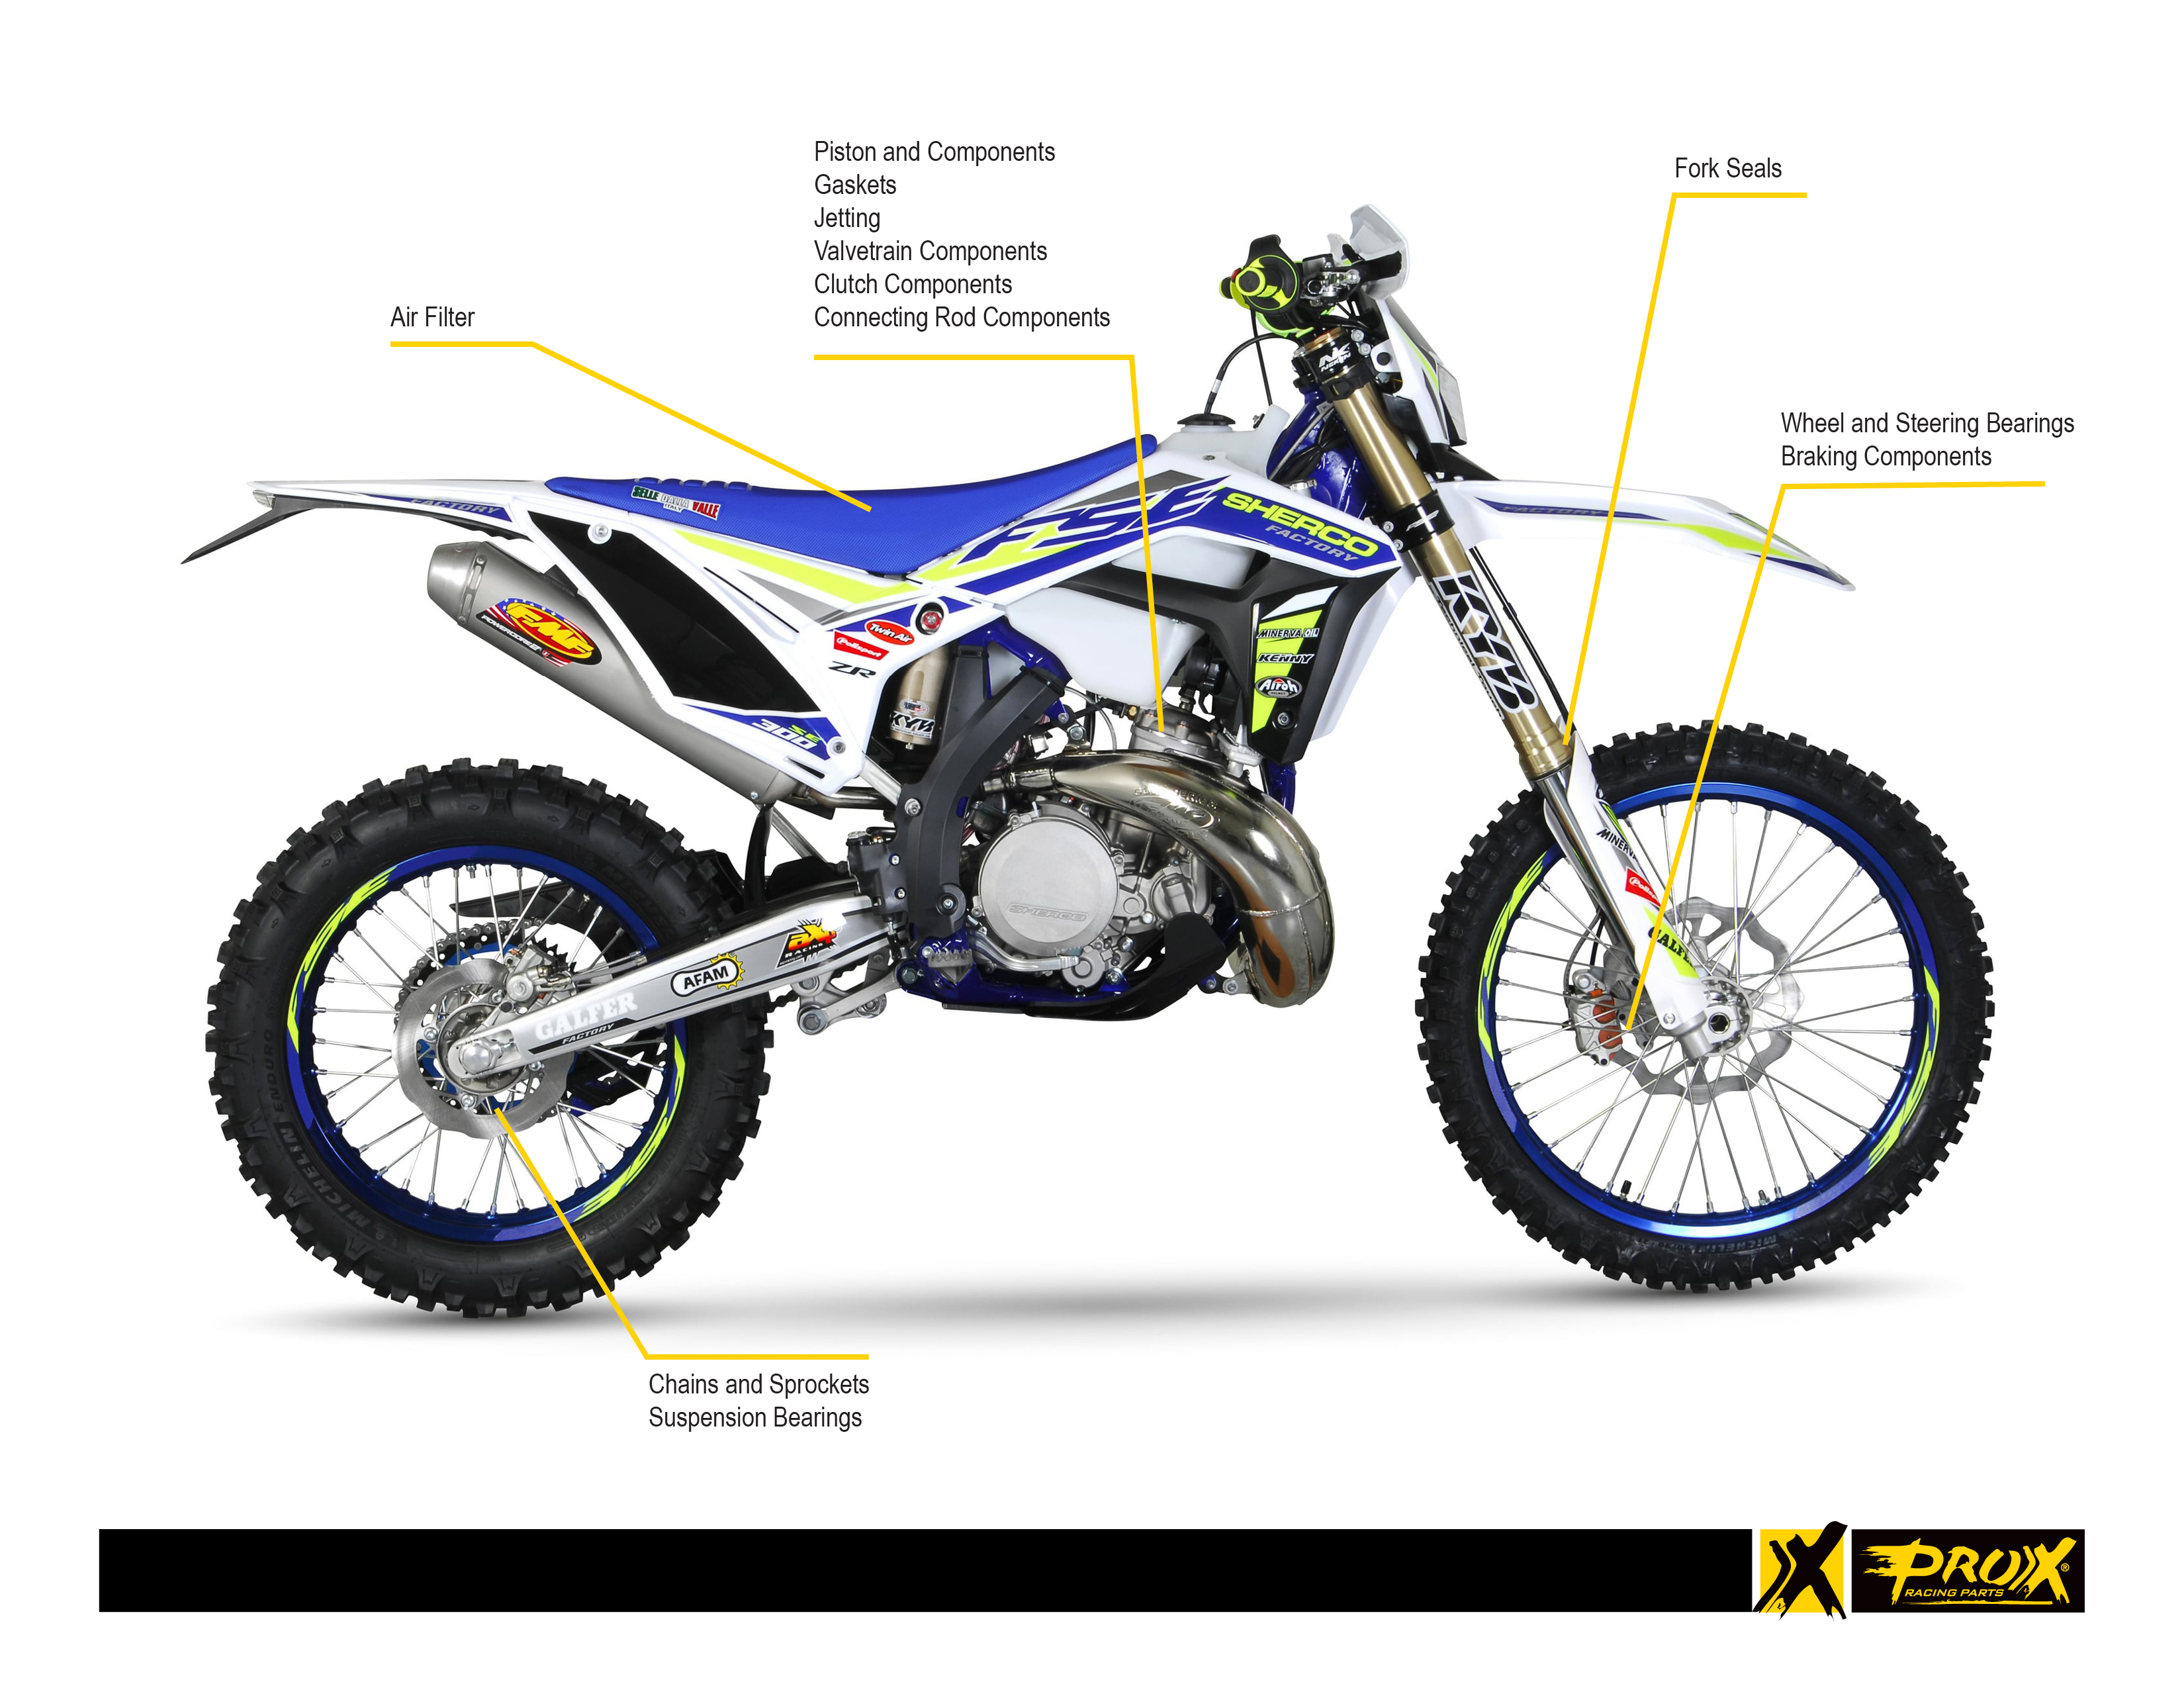 Complete Lineup of Performance Replacement Parts for Sherco Motorcycles from ProX